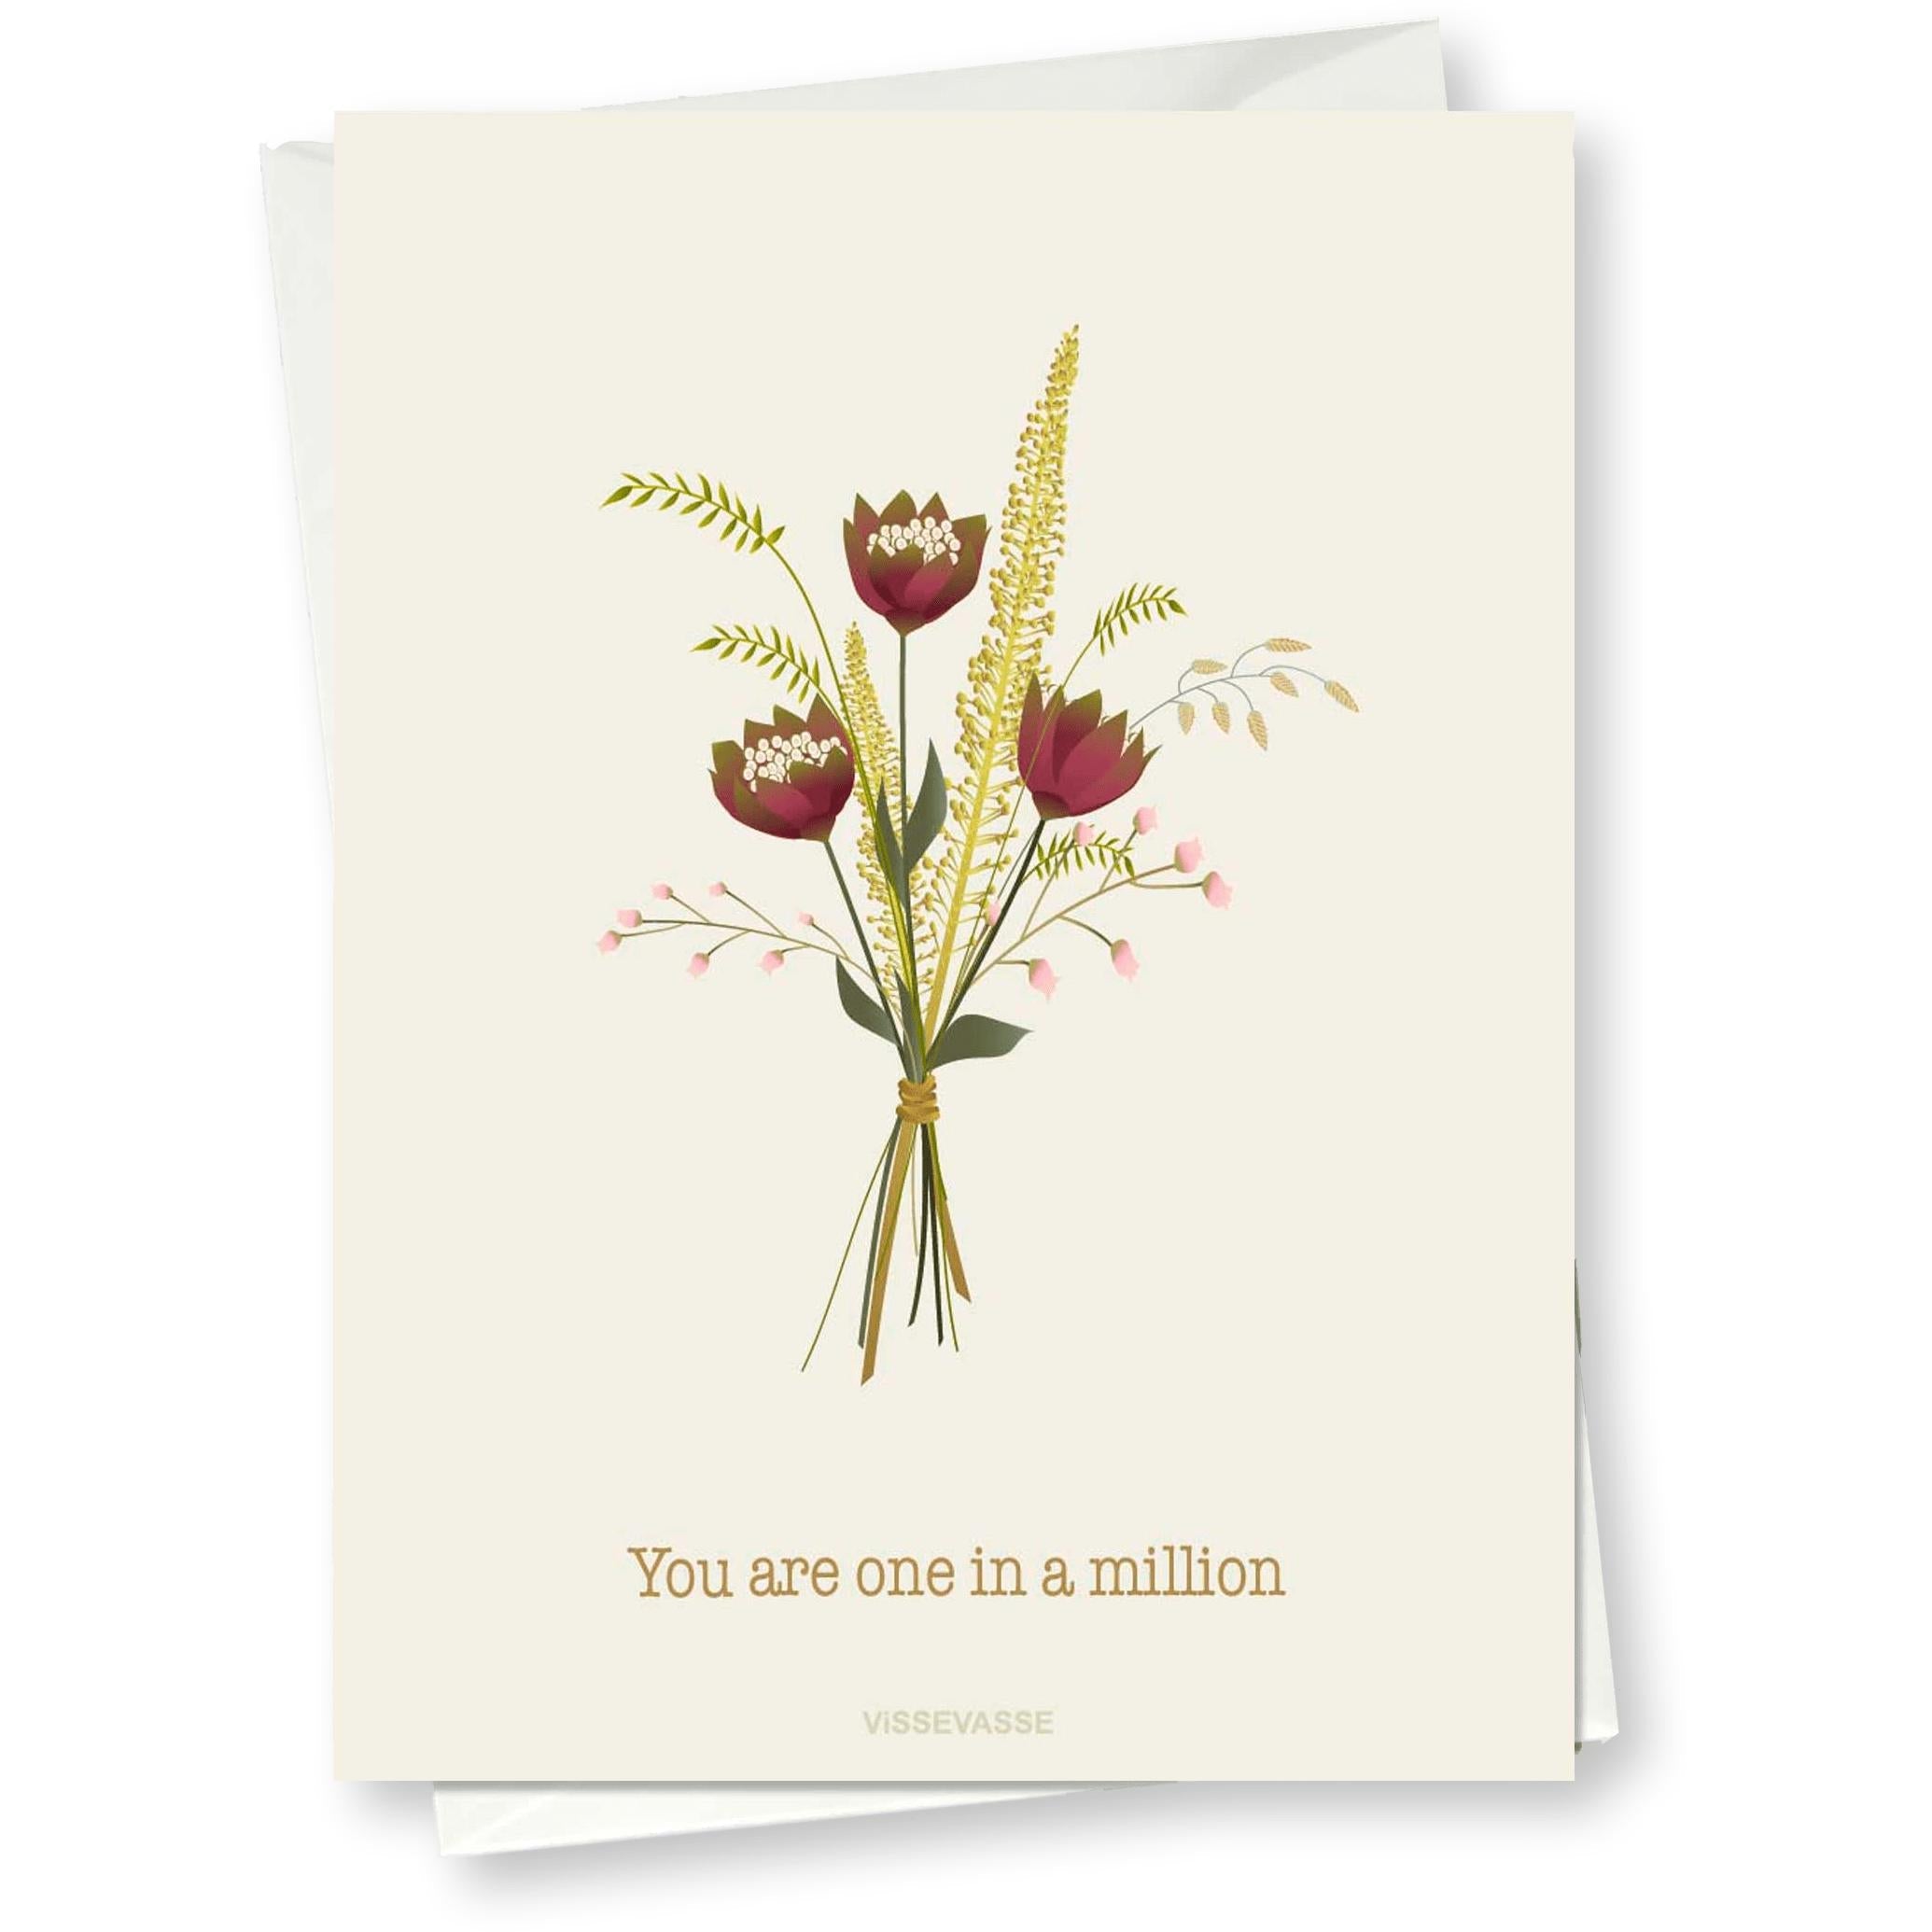 Vissevasse You Are One In A Million Greeting Card, 10x15cm